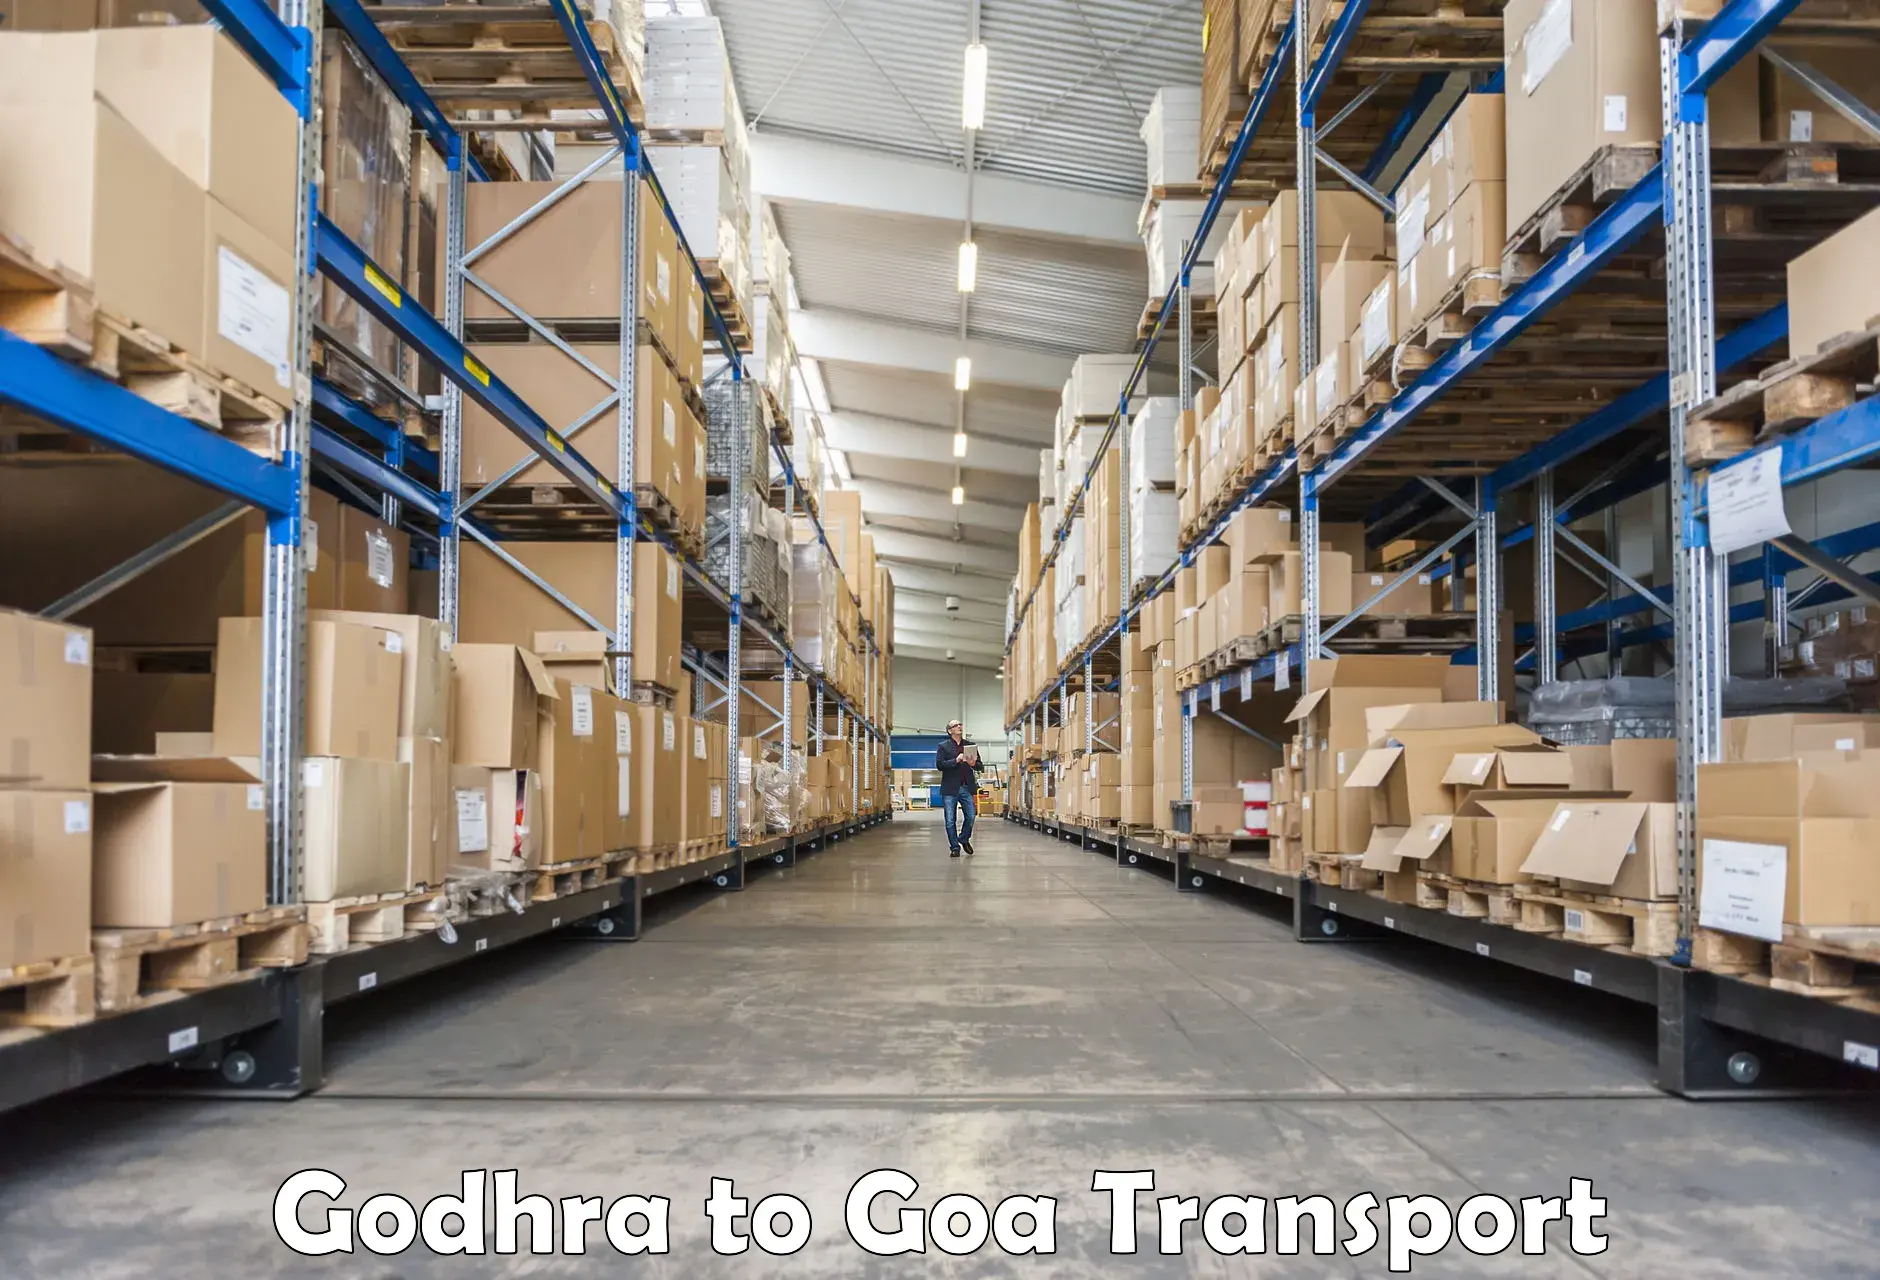 Daily transport service Godhra to Margao